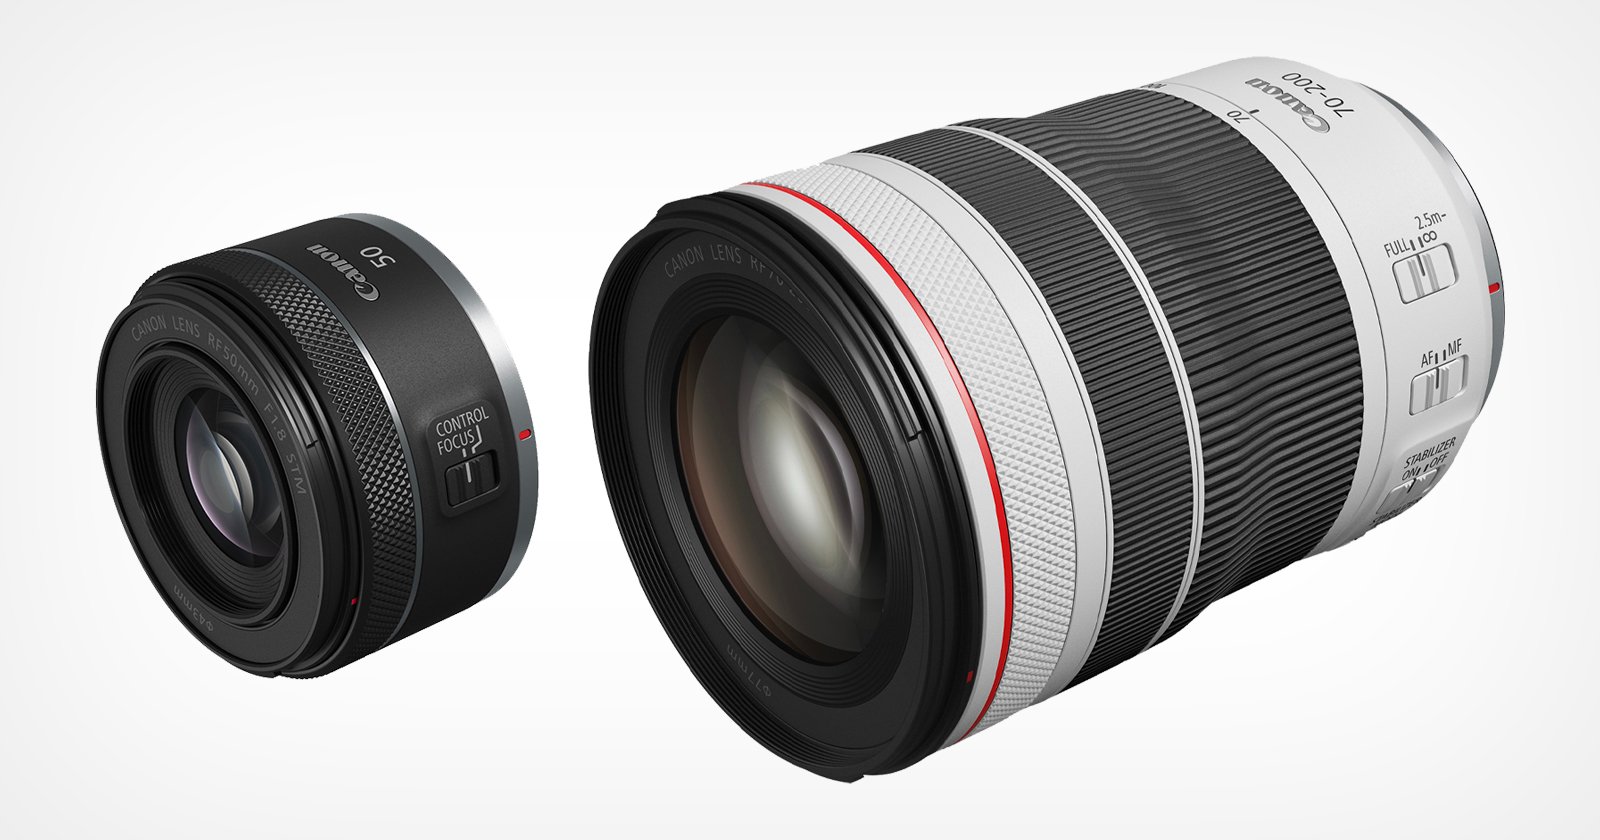 Canon Adds 70-200mm f/4 L and 50mm f/1.8 STM Lenses to RF Lineup